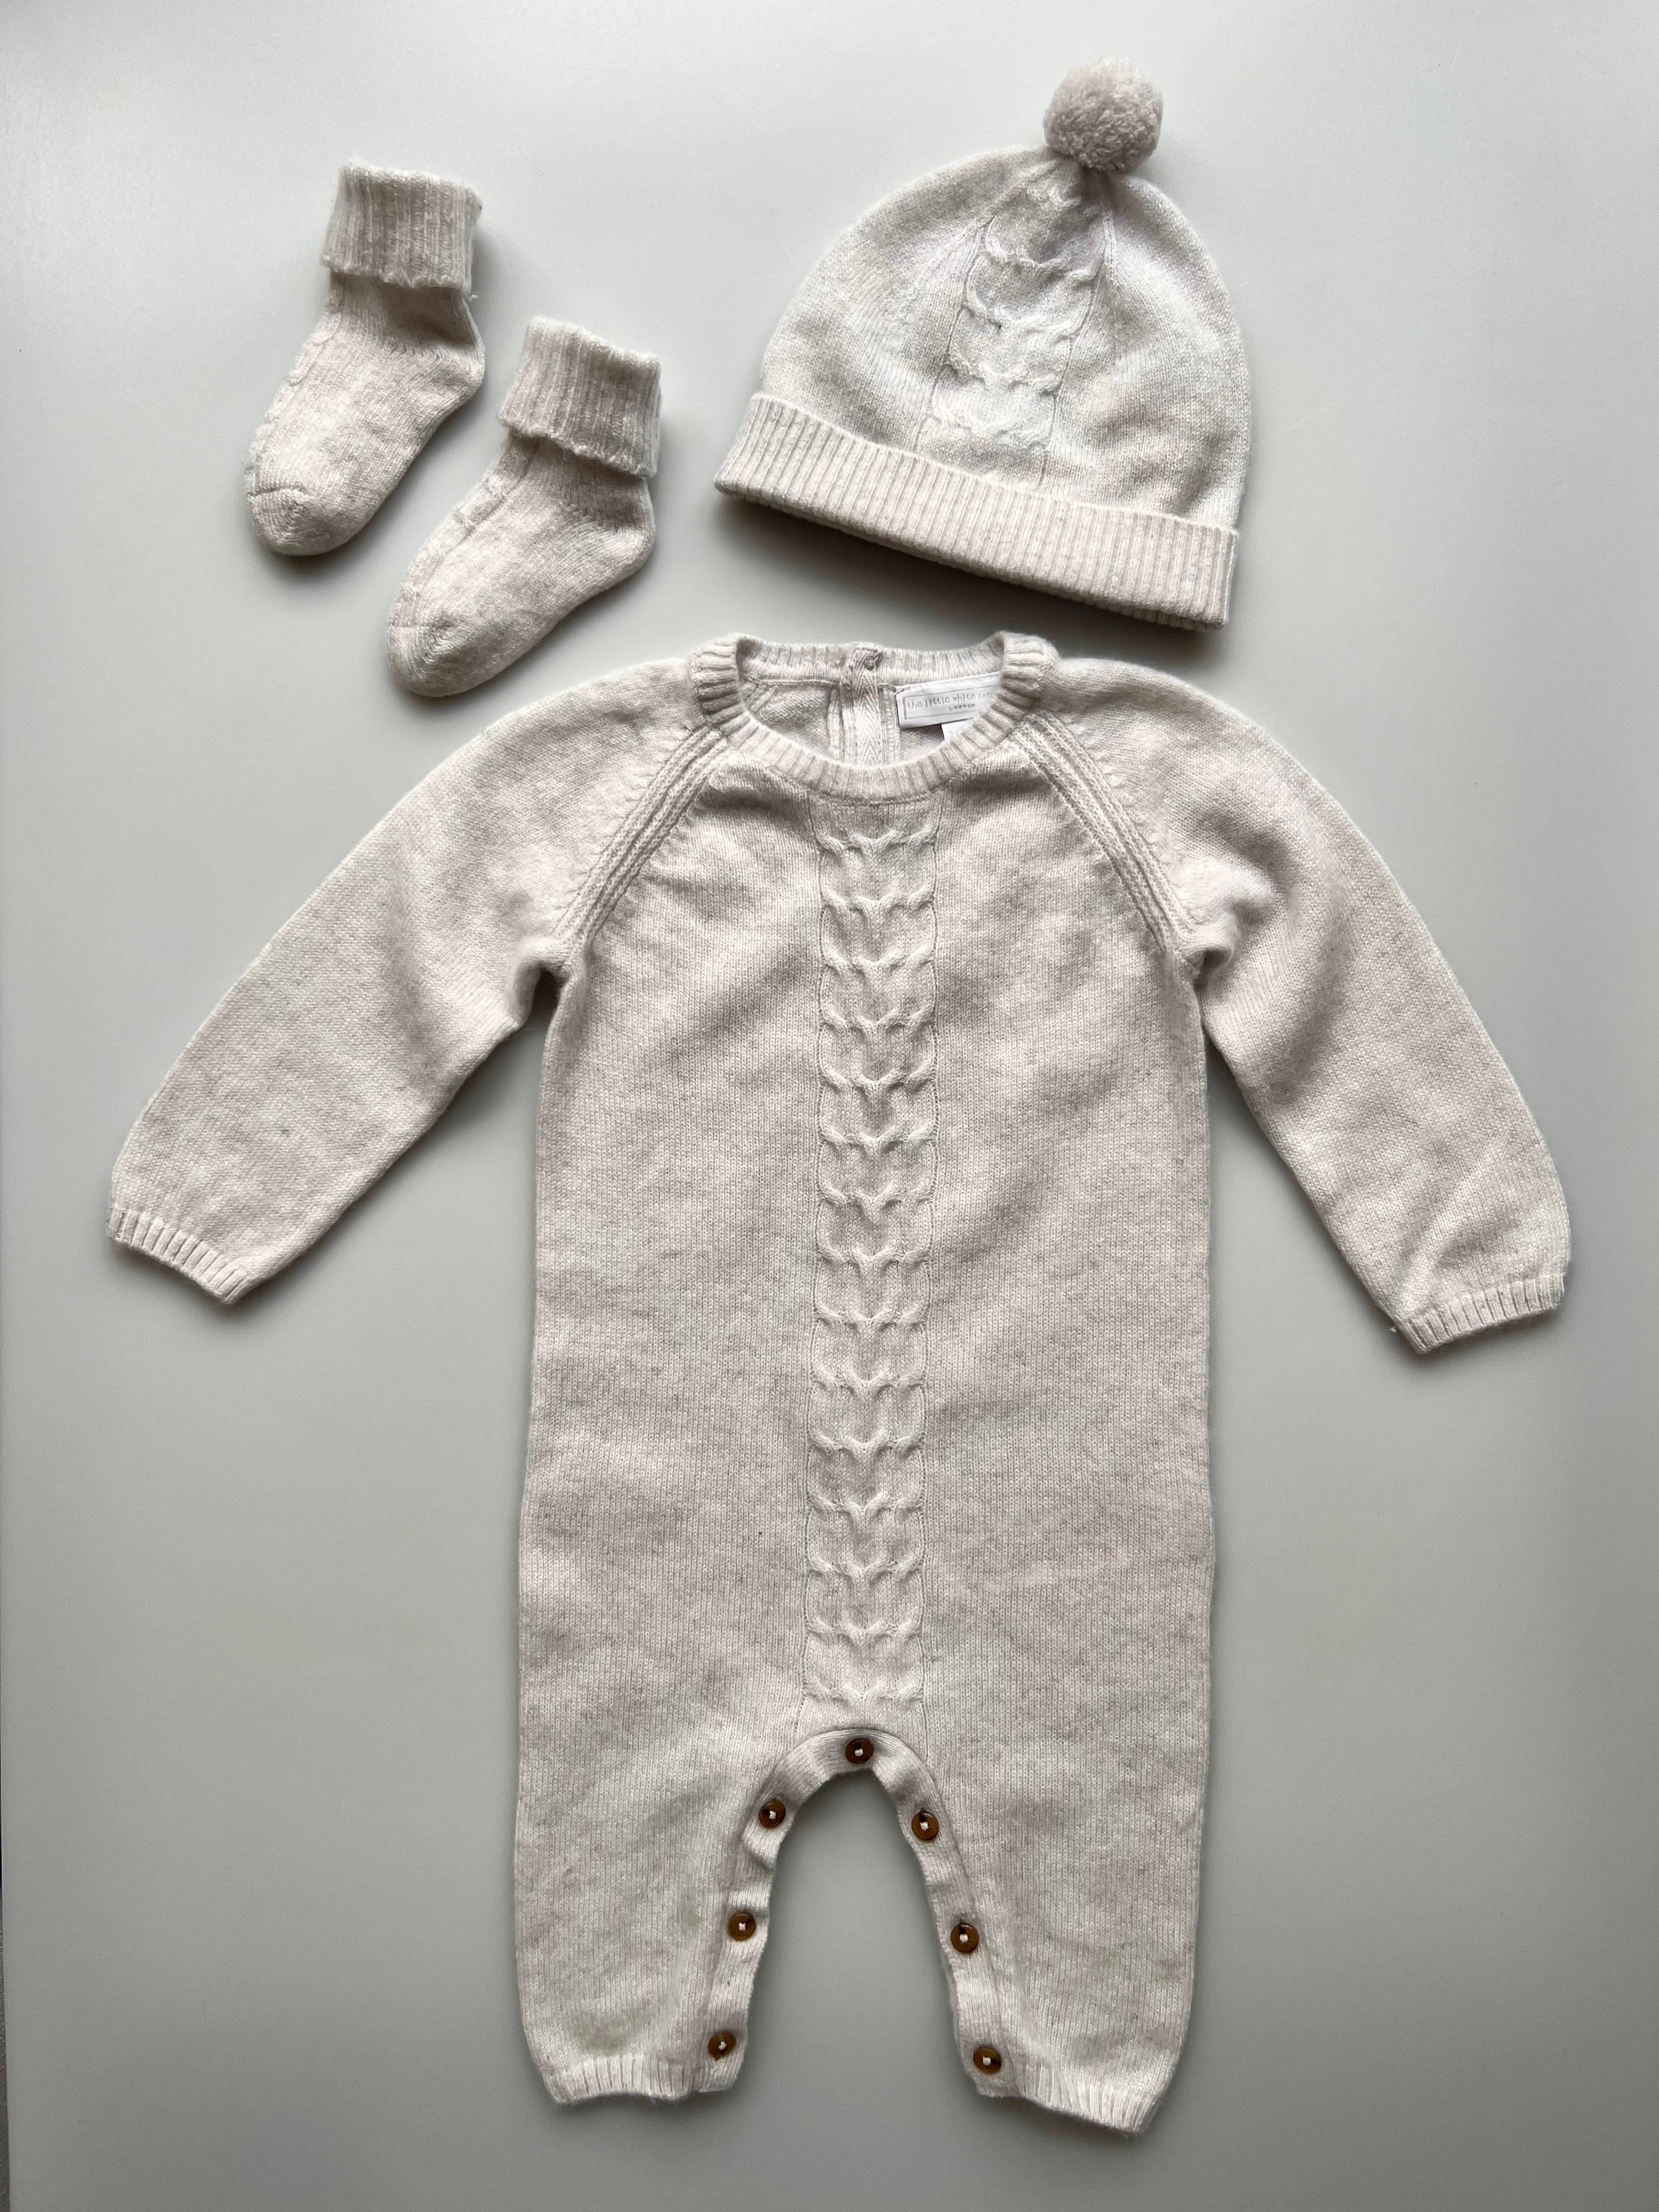 The Little White Company Cashmere Baby Gift Set 3-6 Months RRP £175